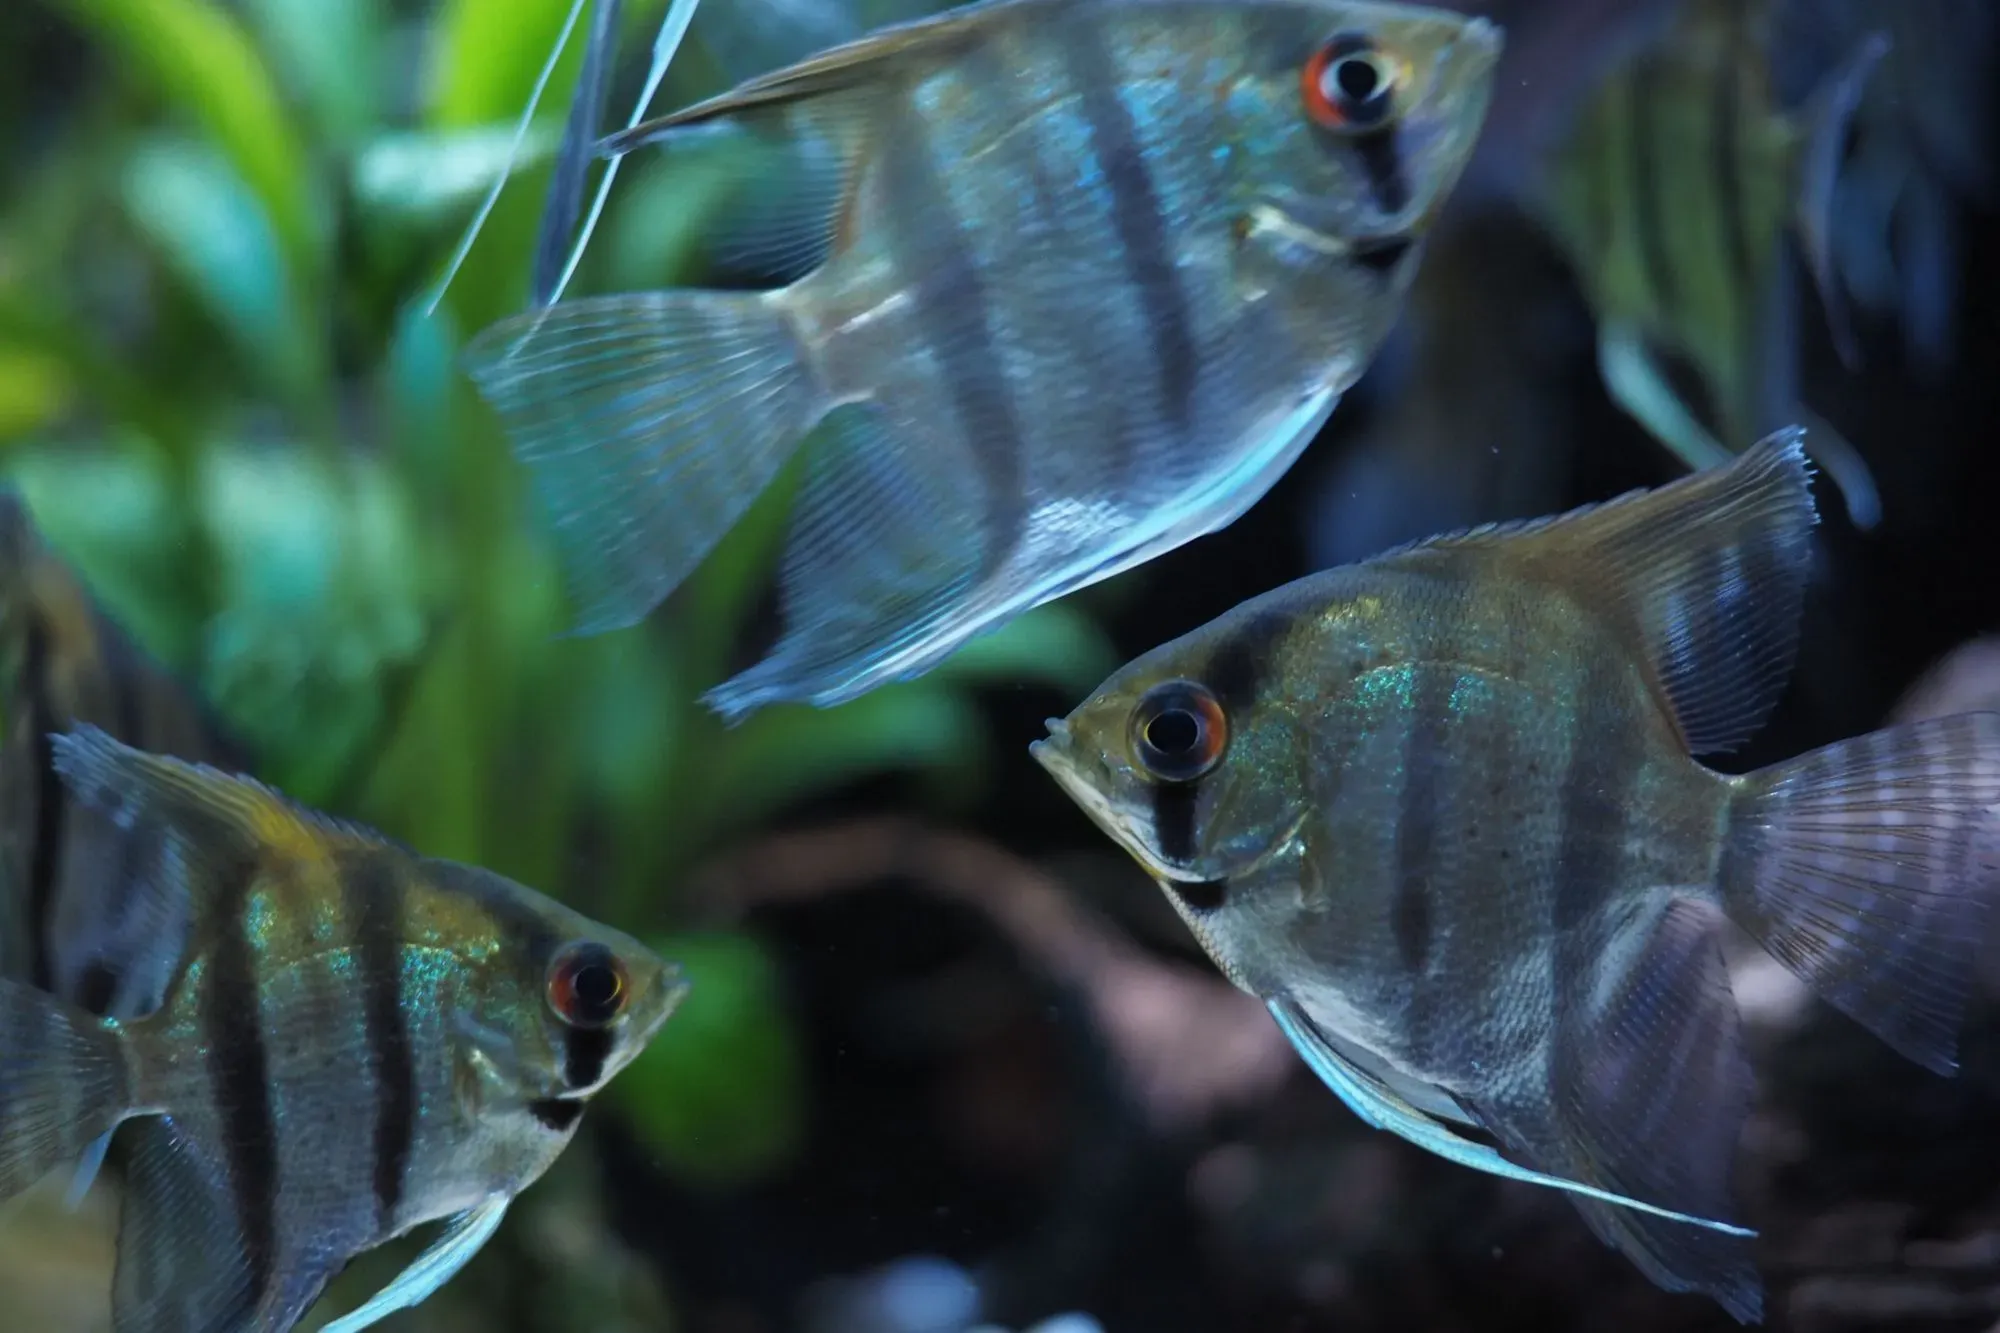 Find out more about these fish like how big do angelfish get?